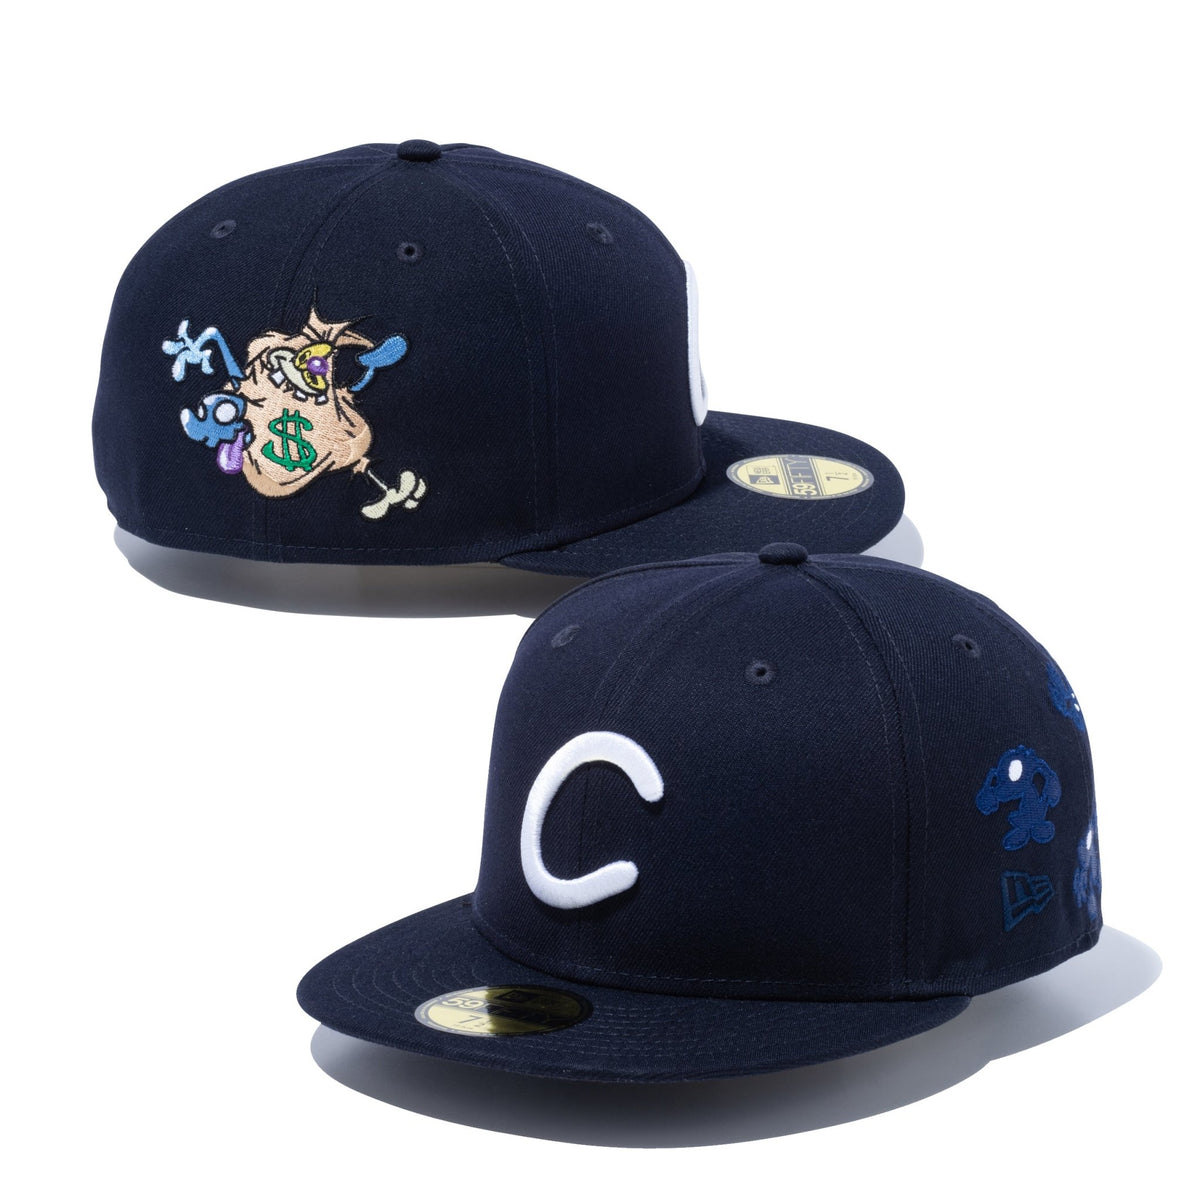 59FIFTY COIN PARKING DELIVERY Cロゴ ネイビー